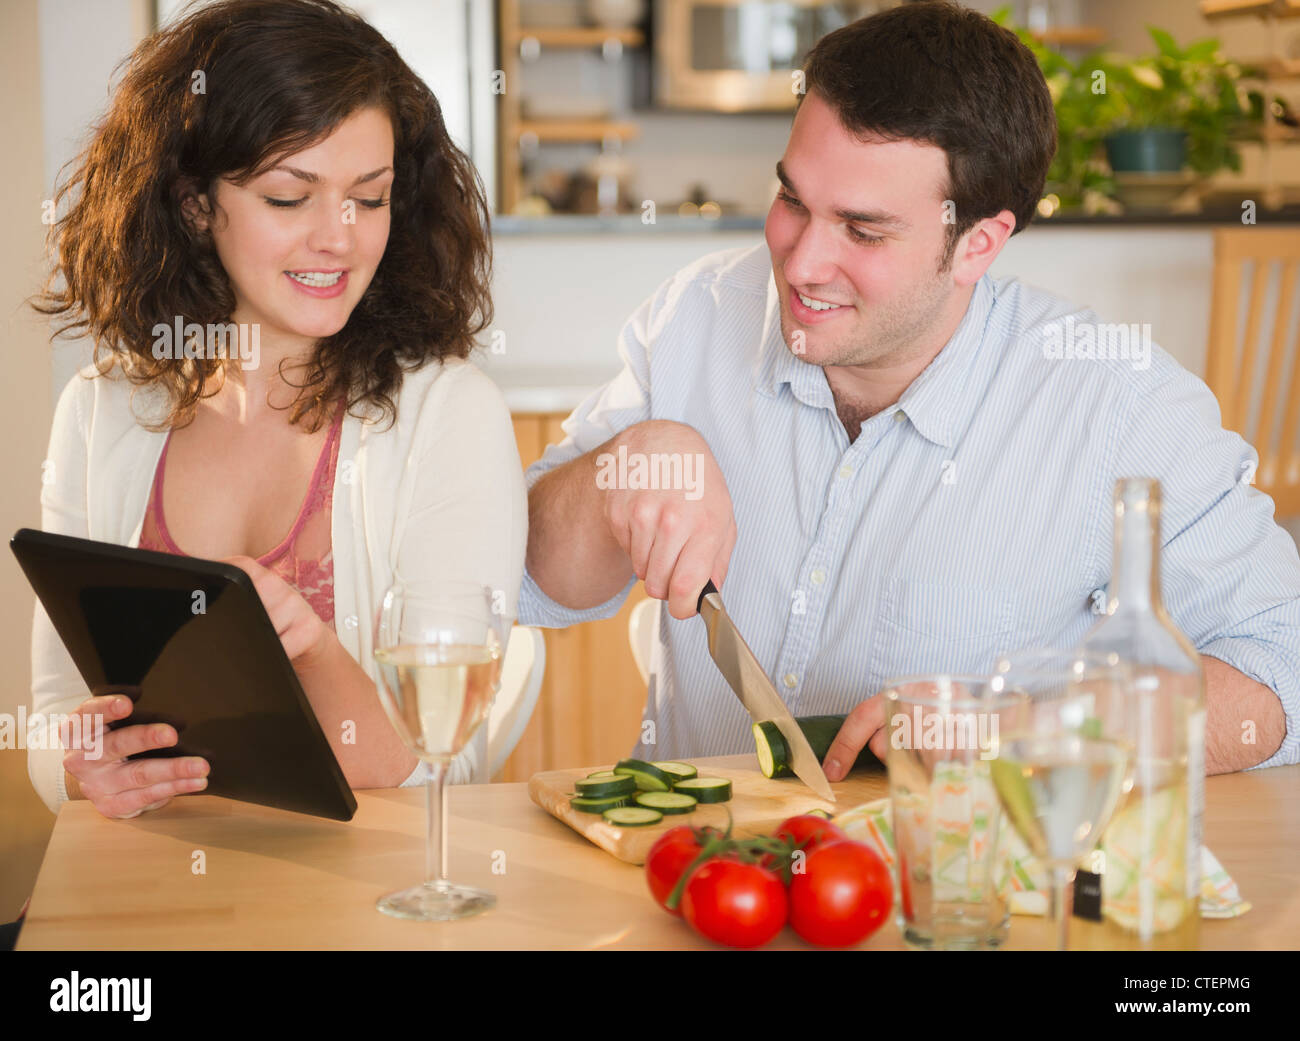 USA, New Jersey, Jersey City, Couple preparing meal and using digital tablet Stock Photo